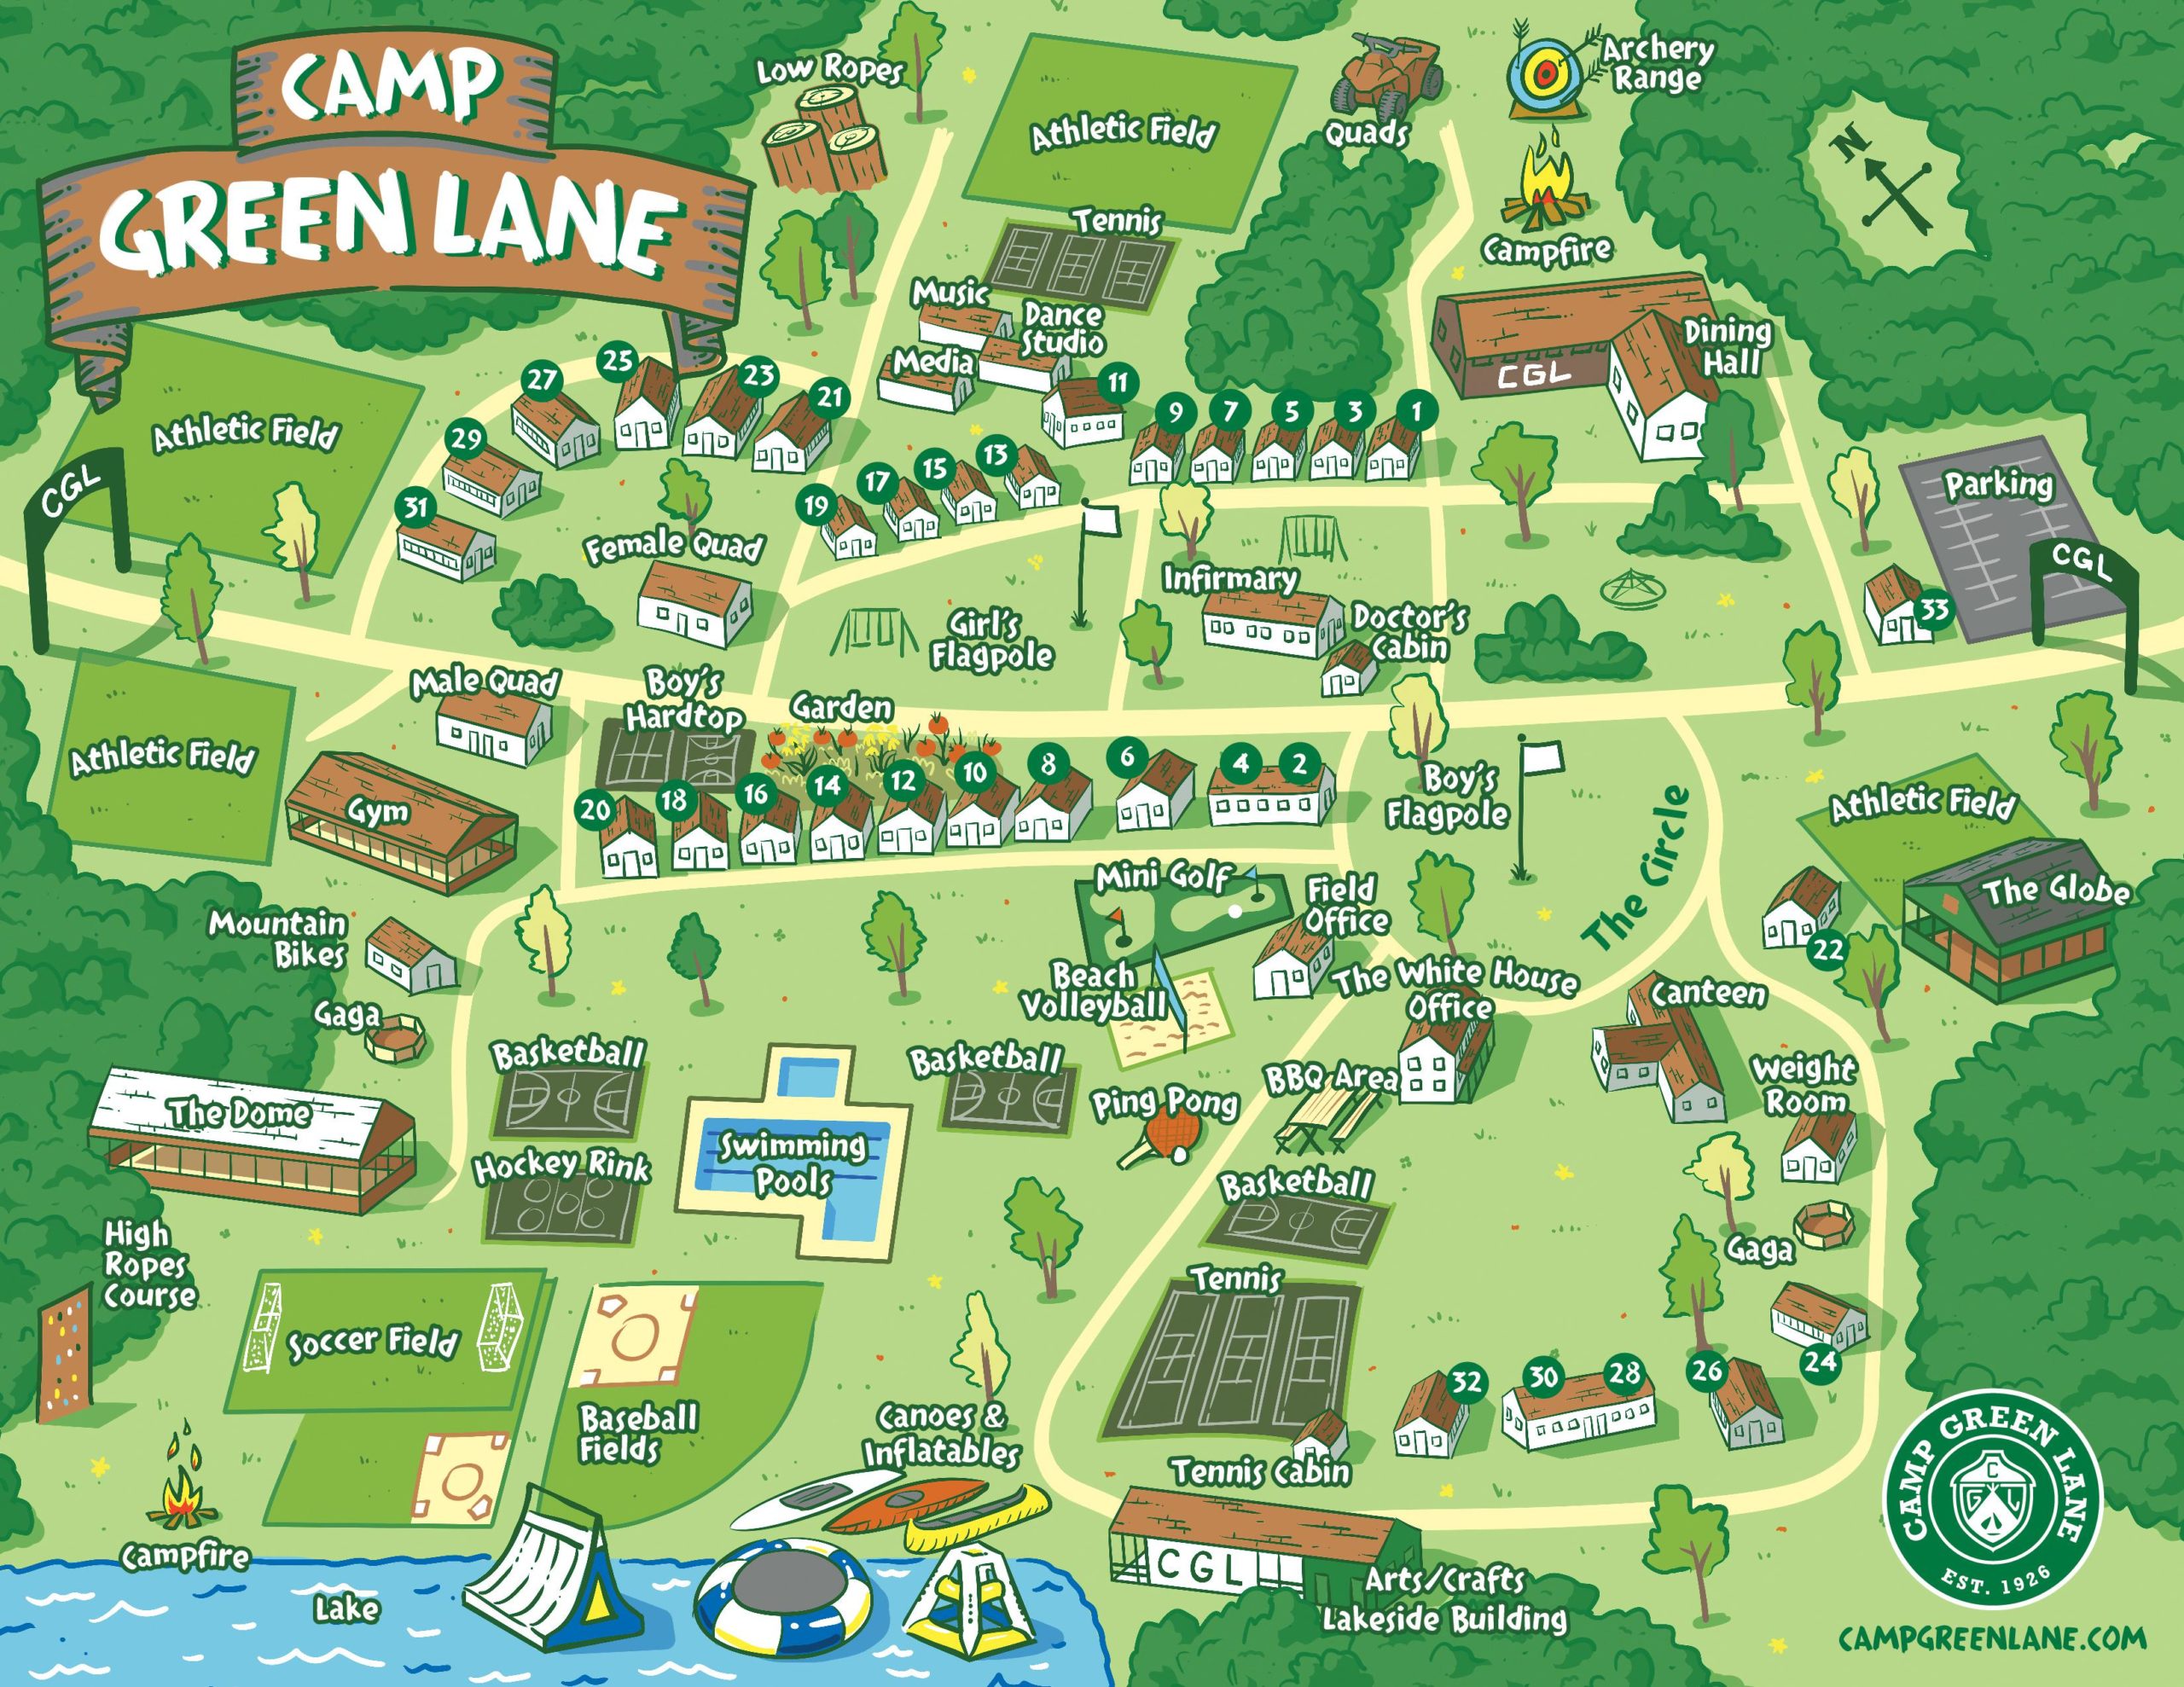 Our campus map